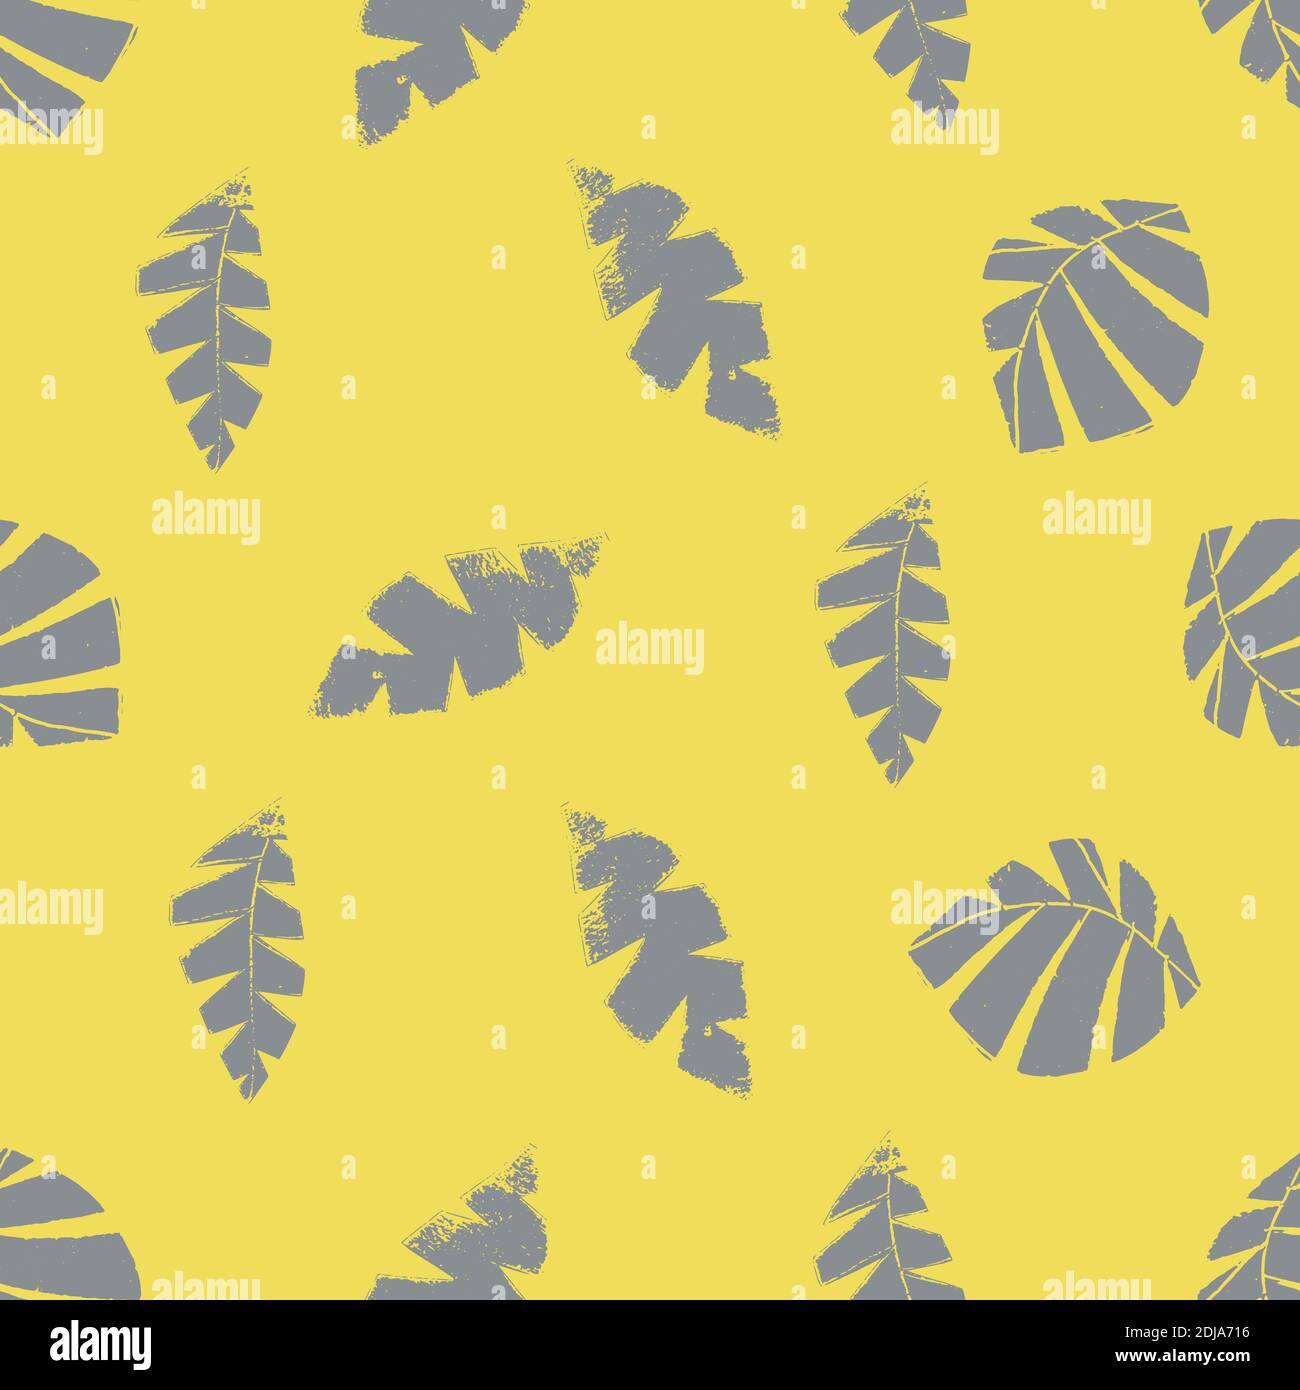 Mono print style scattered leaves seamless vector pattern background. Textured cut out grey foliage on yellow backdrop. Hand crafted painterly design Stock Vector